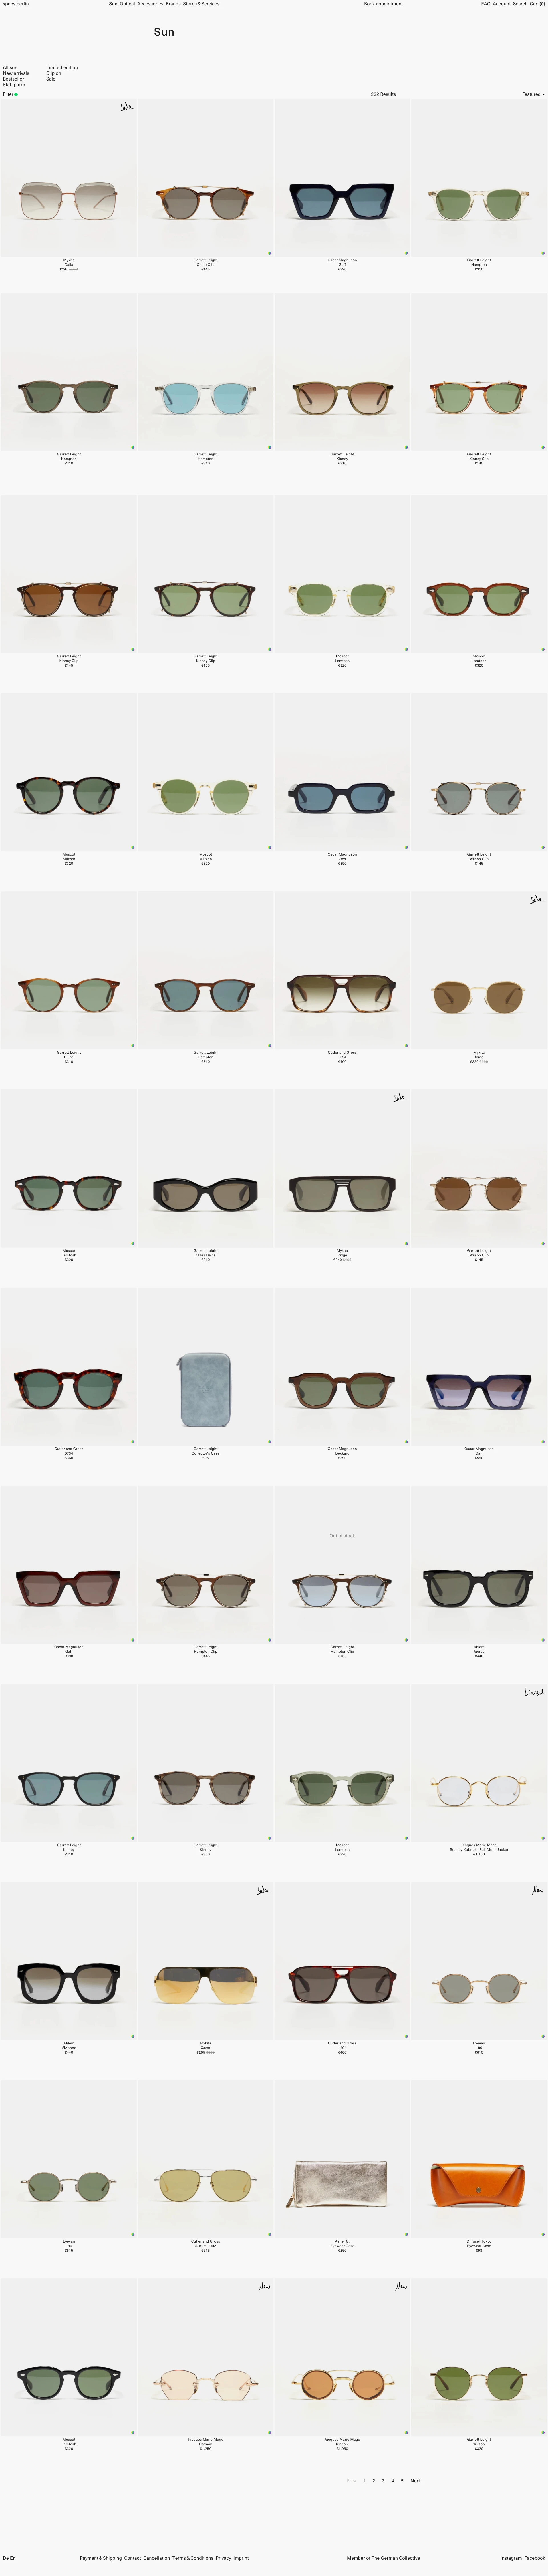 specs.berlin Landing Page Example: Your destination to discover the latest in sunglasses and optical frames from hand-picked eyewear brands – online and in our stores in Berlin.